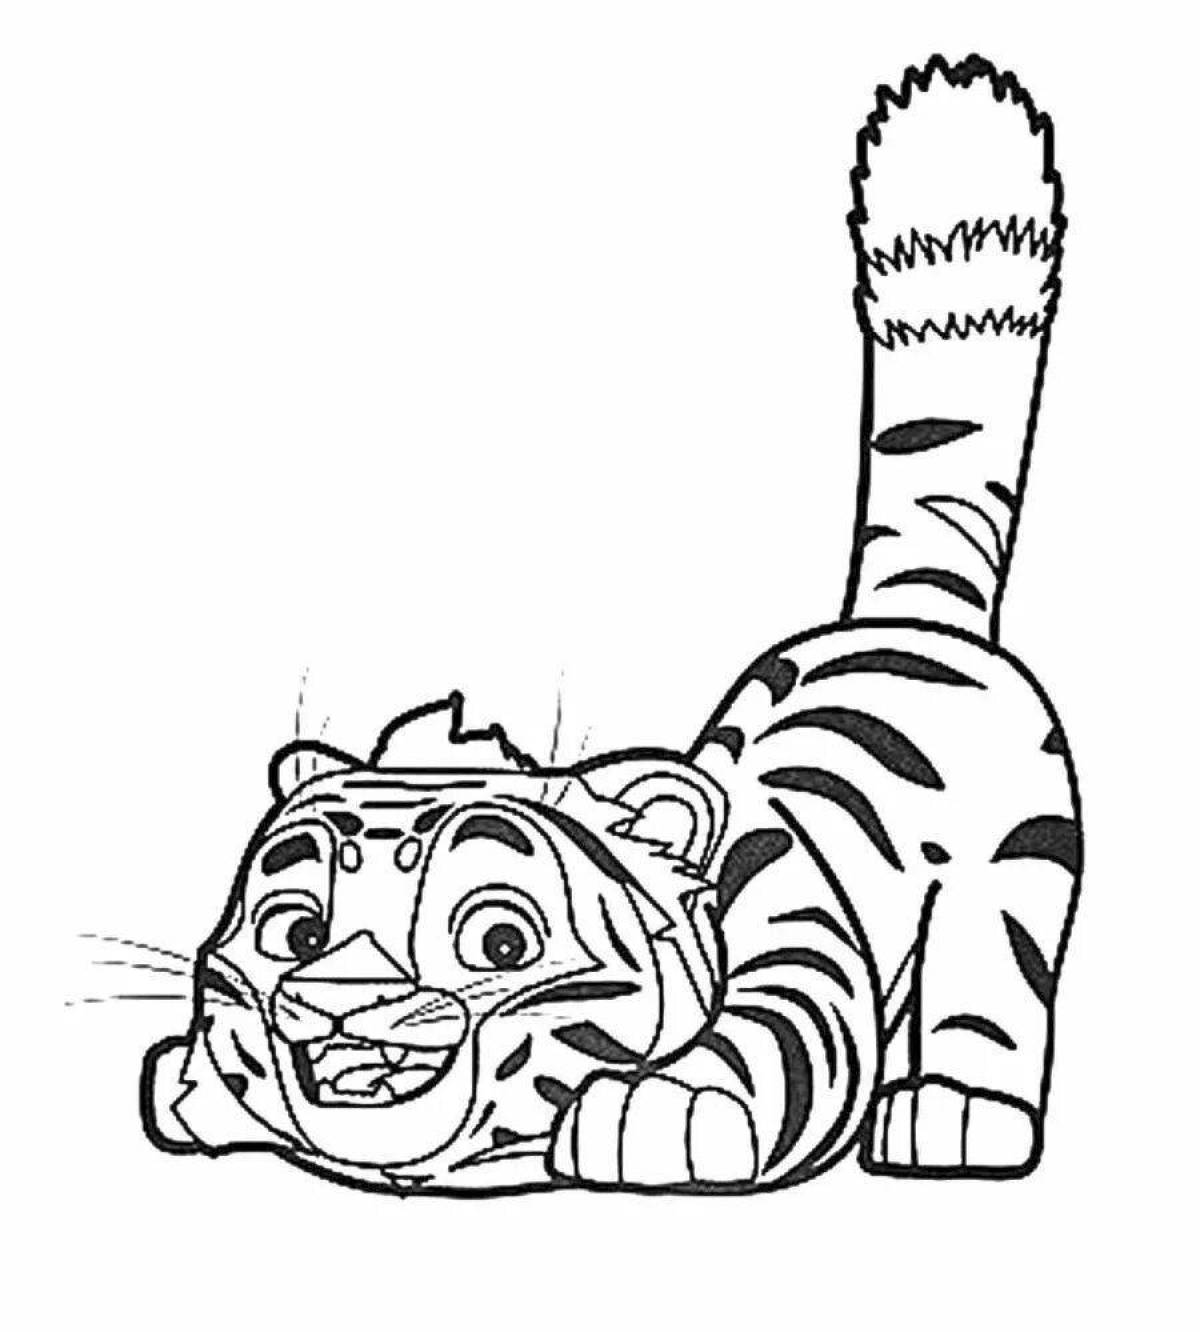 Amazing tiger and lion coloring pages for kids